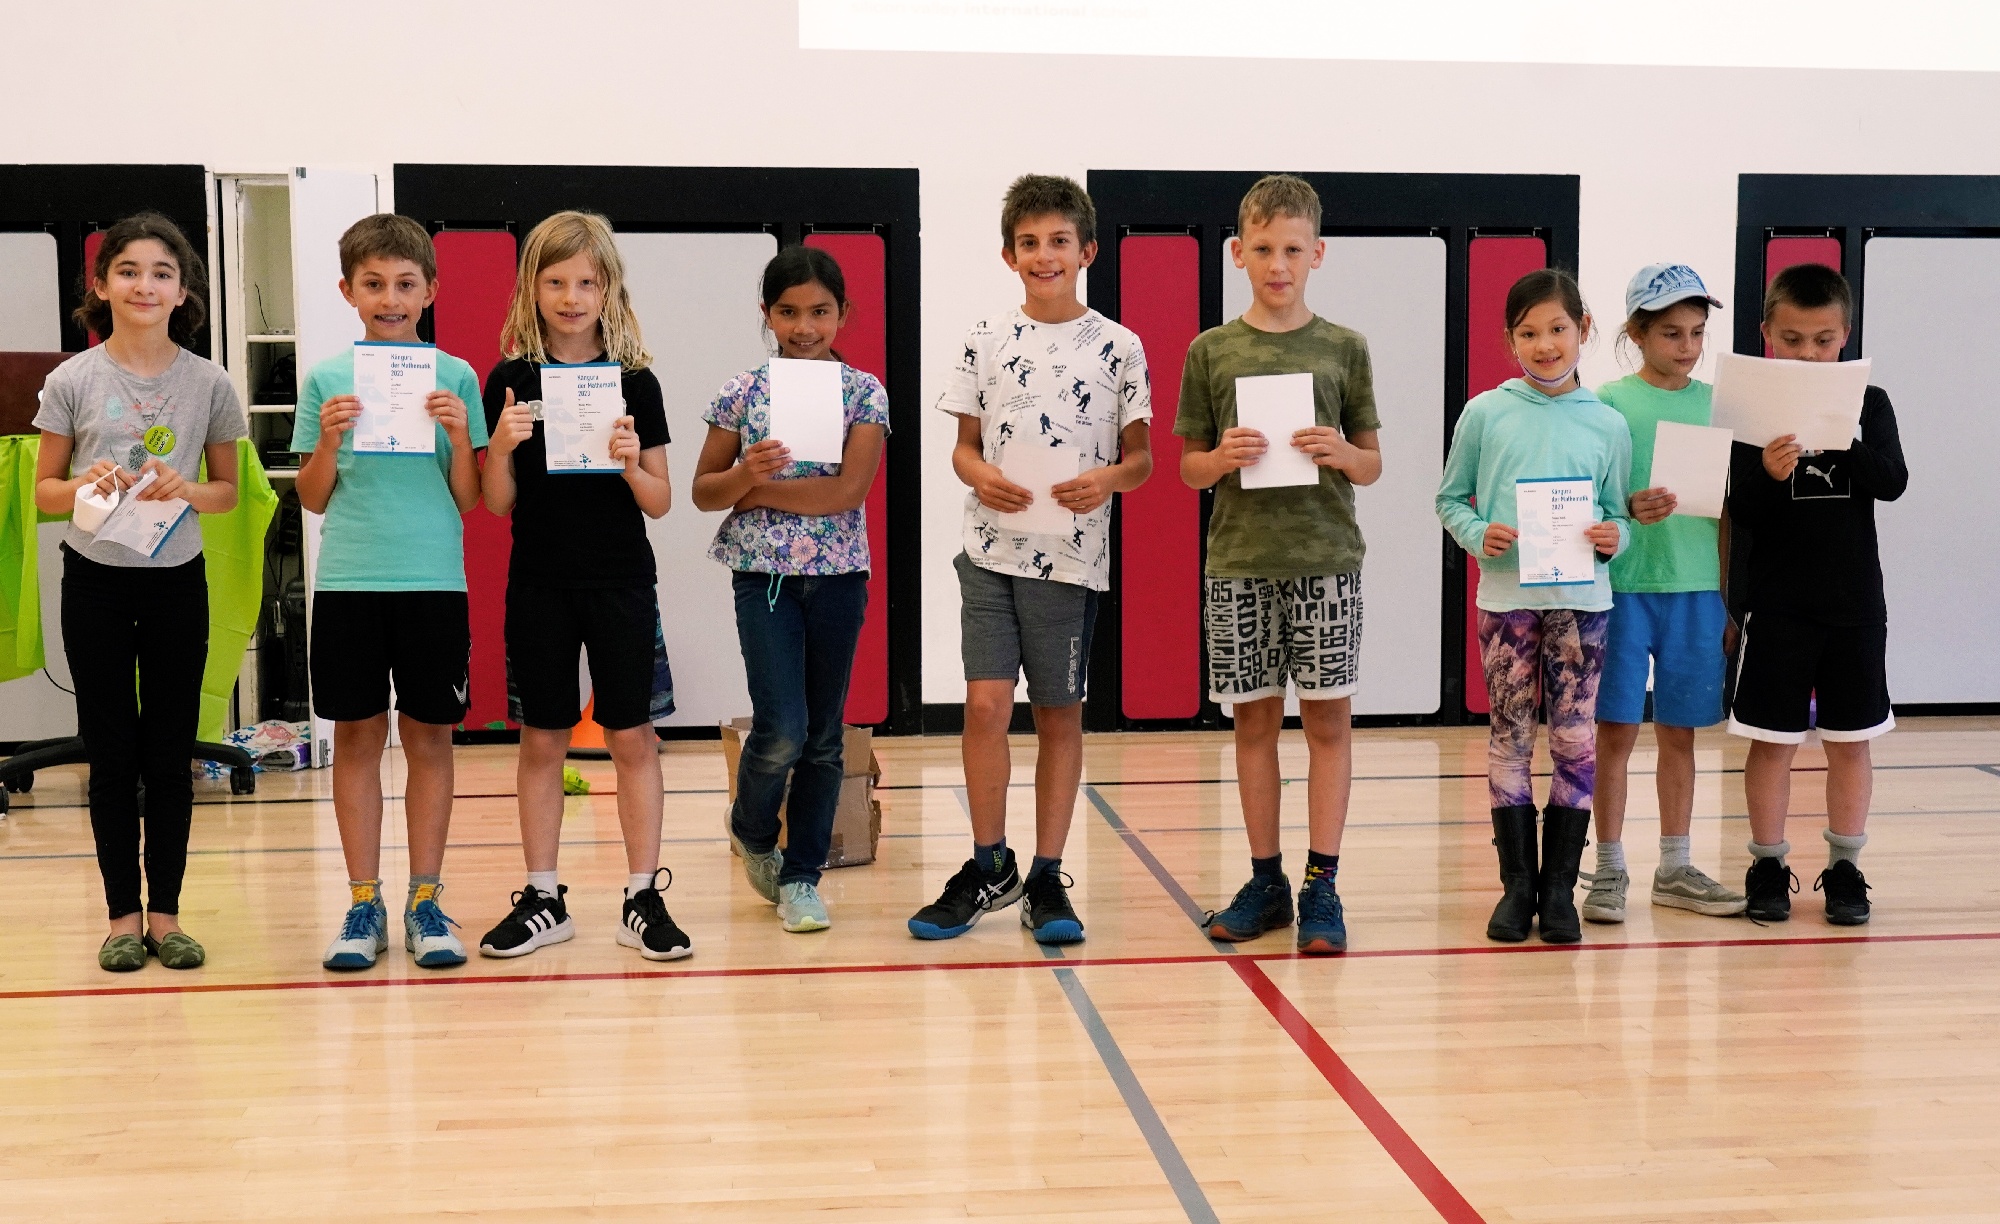 A group photo of all the Elementary School German Program top performers. 